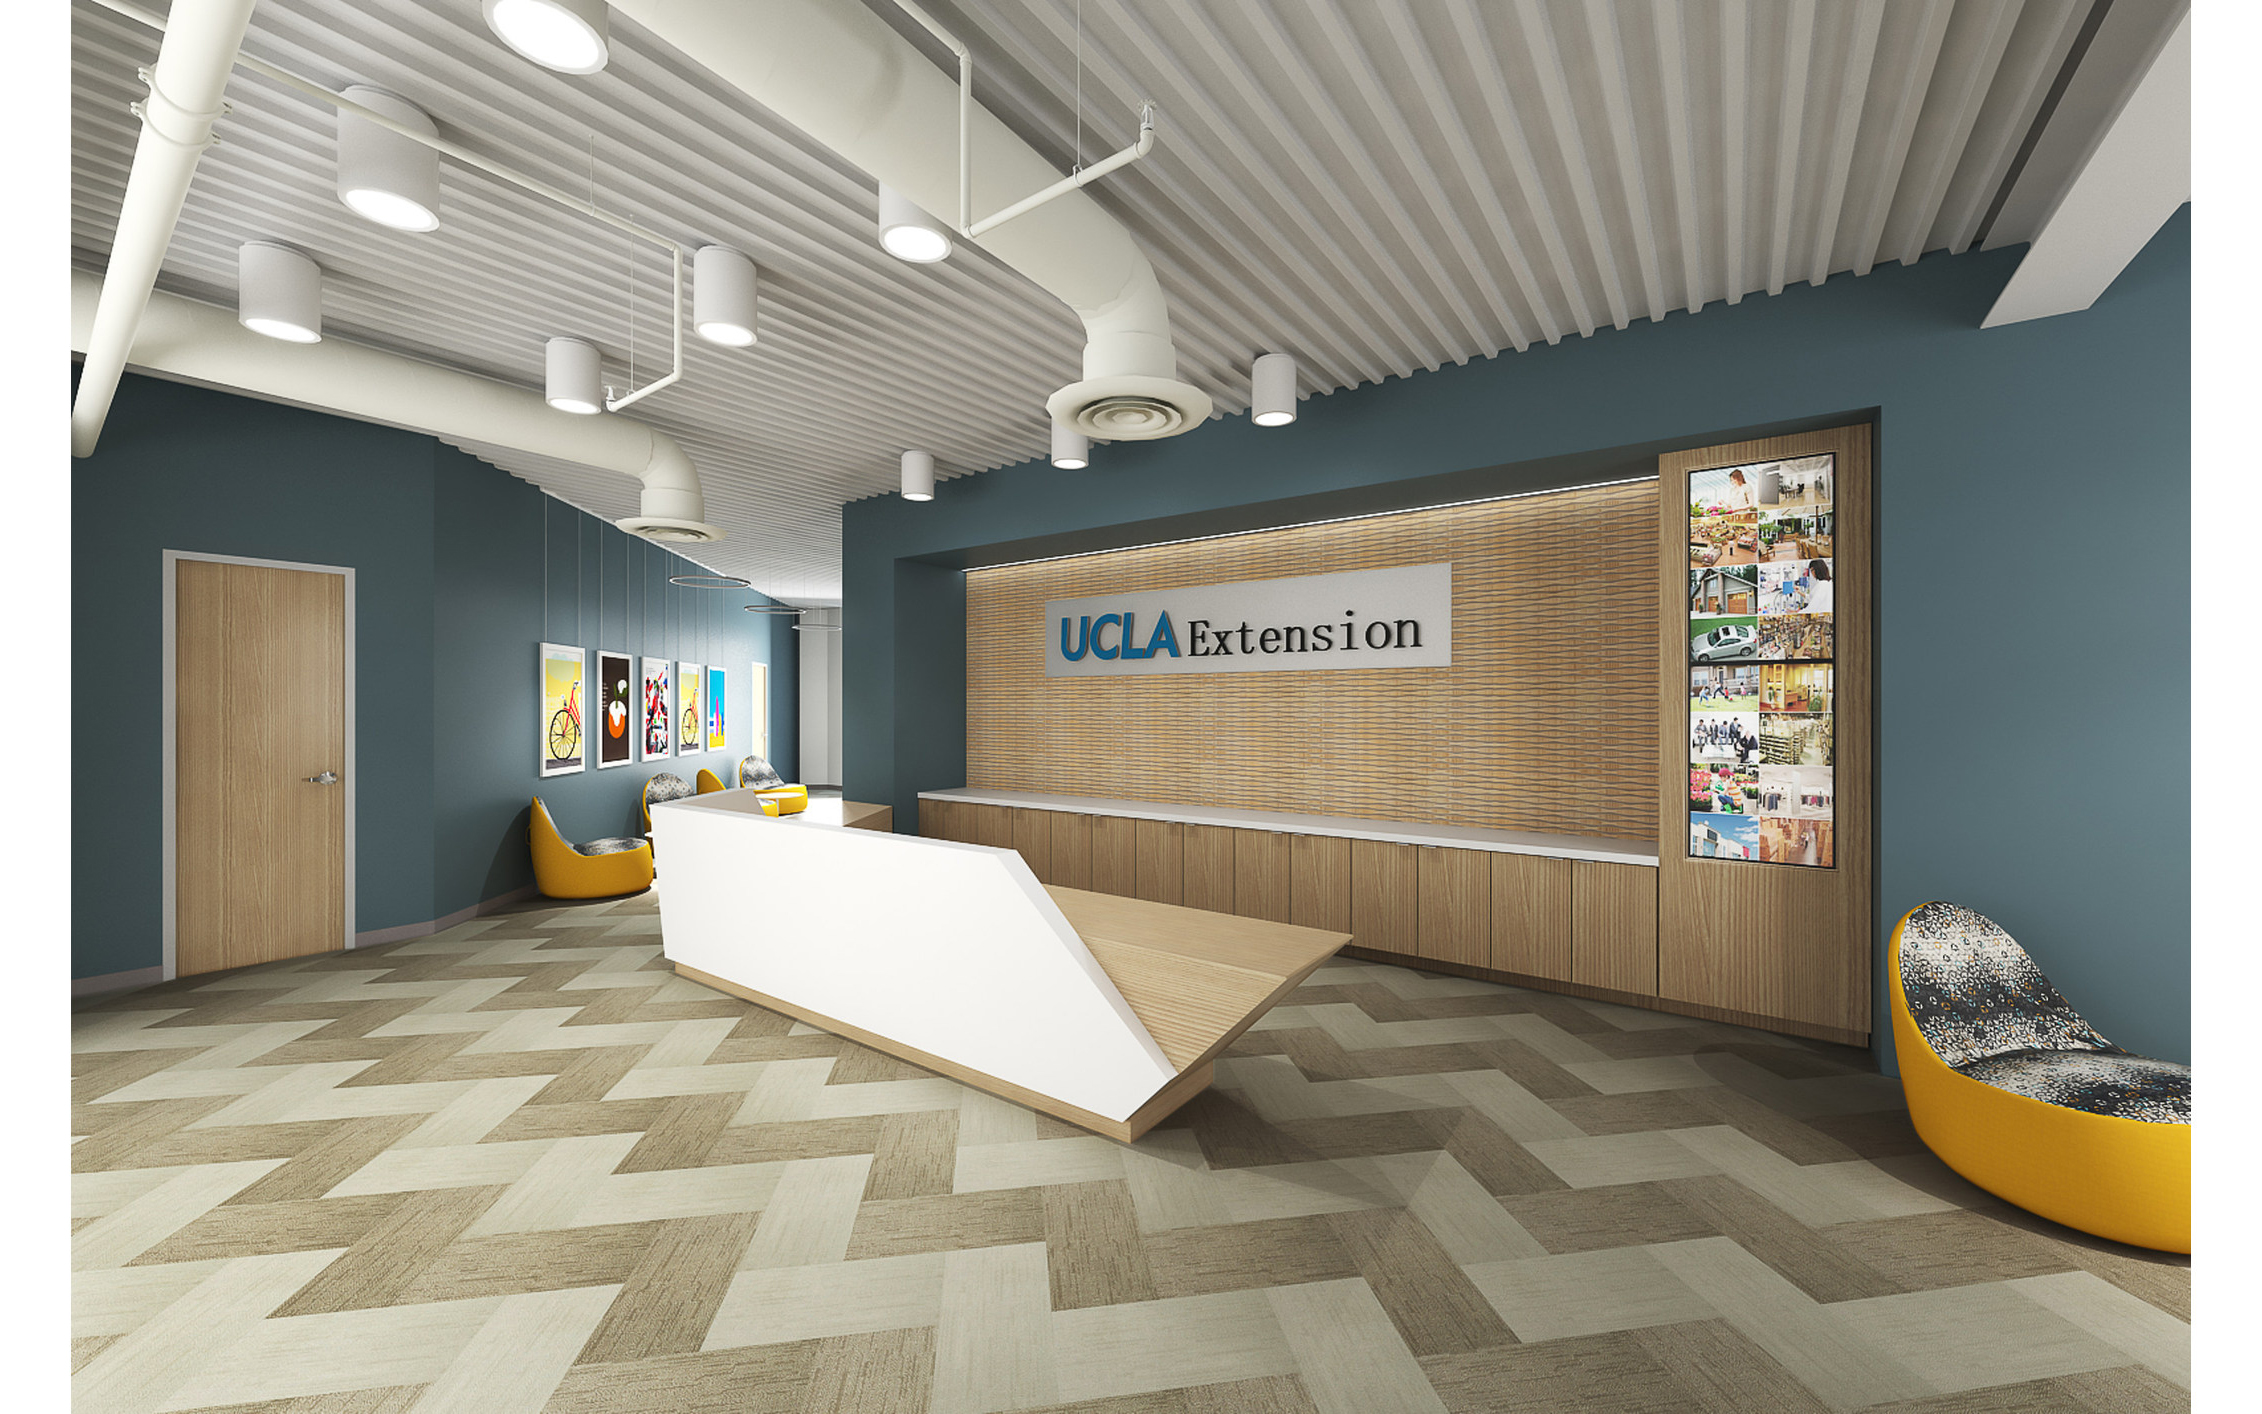 The new state-of-the-art UCLA Extension Woodland Hills location. (PRNewsfoto/UCLA Extension)